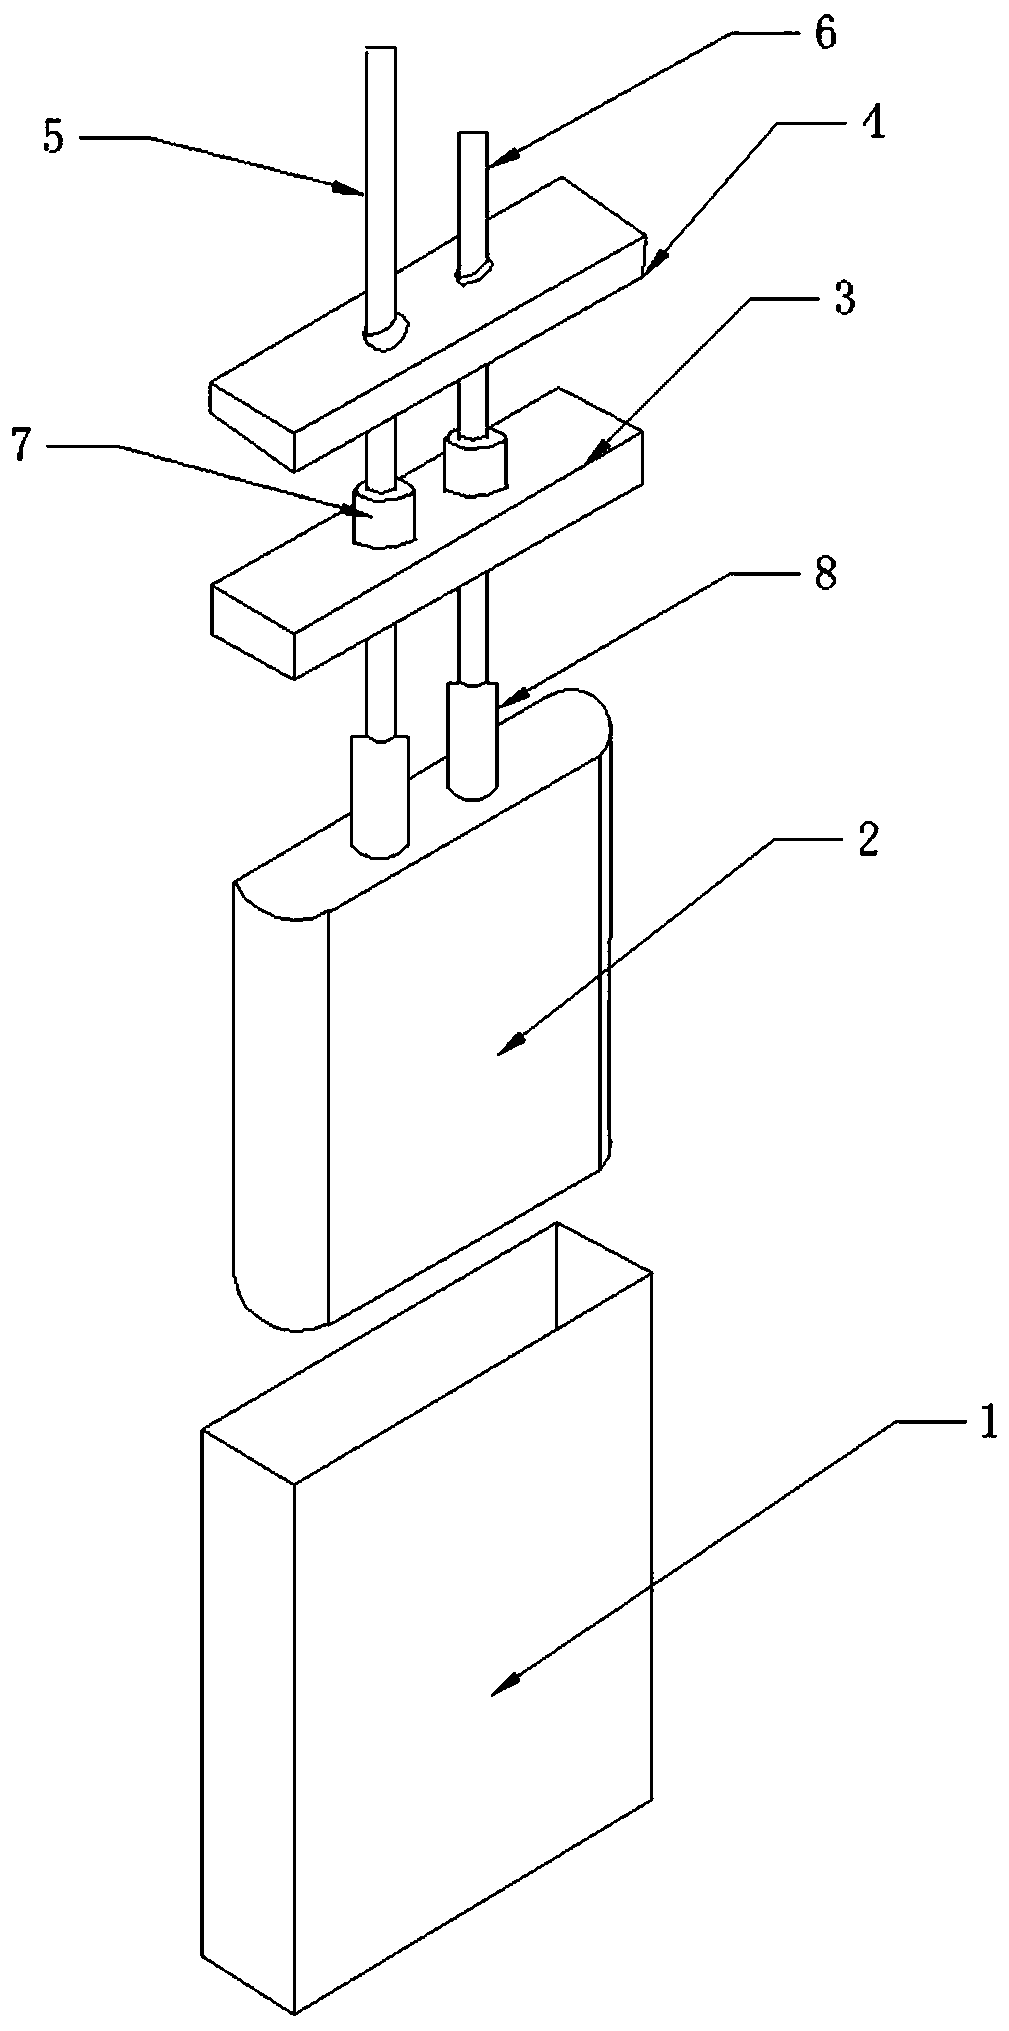 A square solid capacitor and its manufacturing method